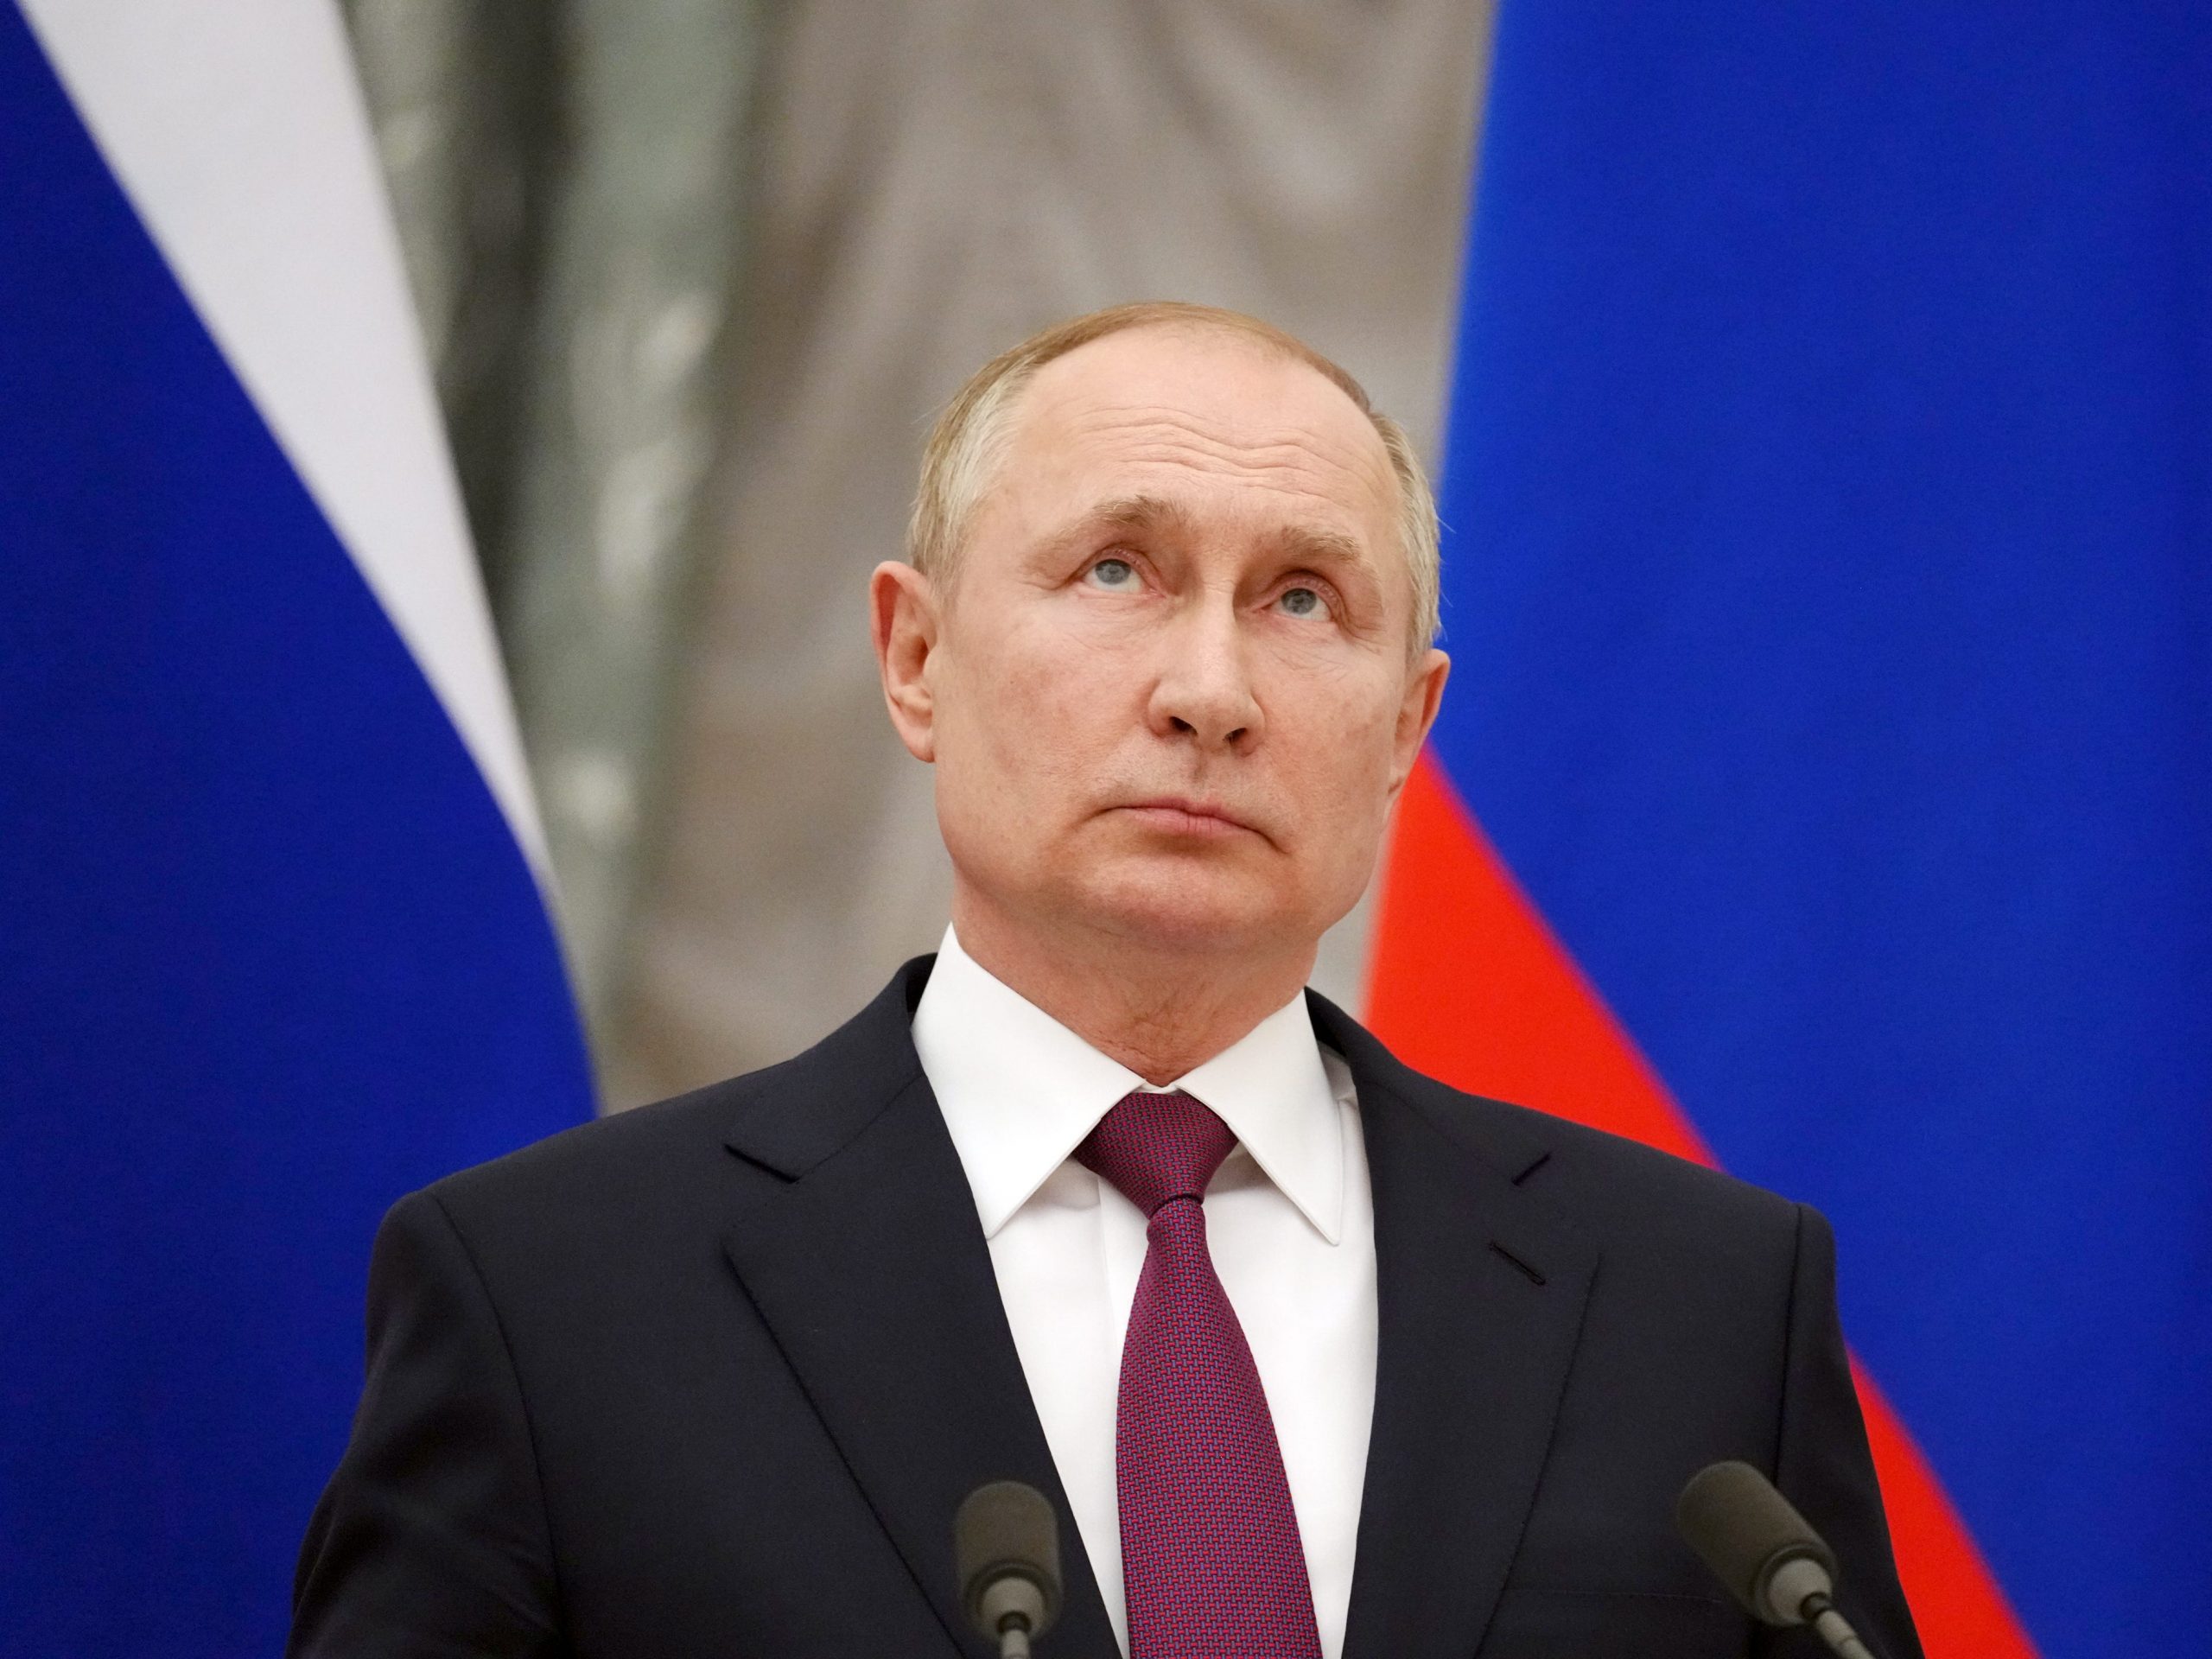 Vladimir Putin stands during a press conference.